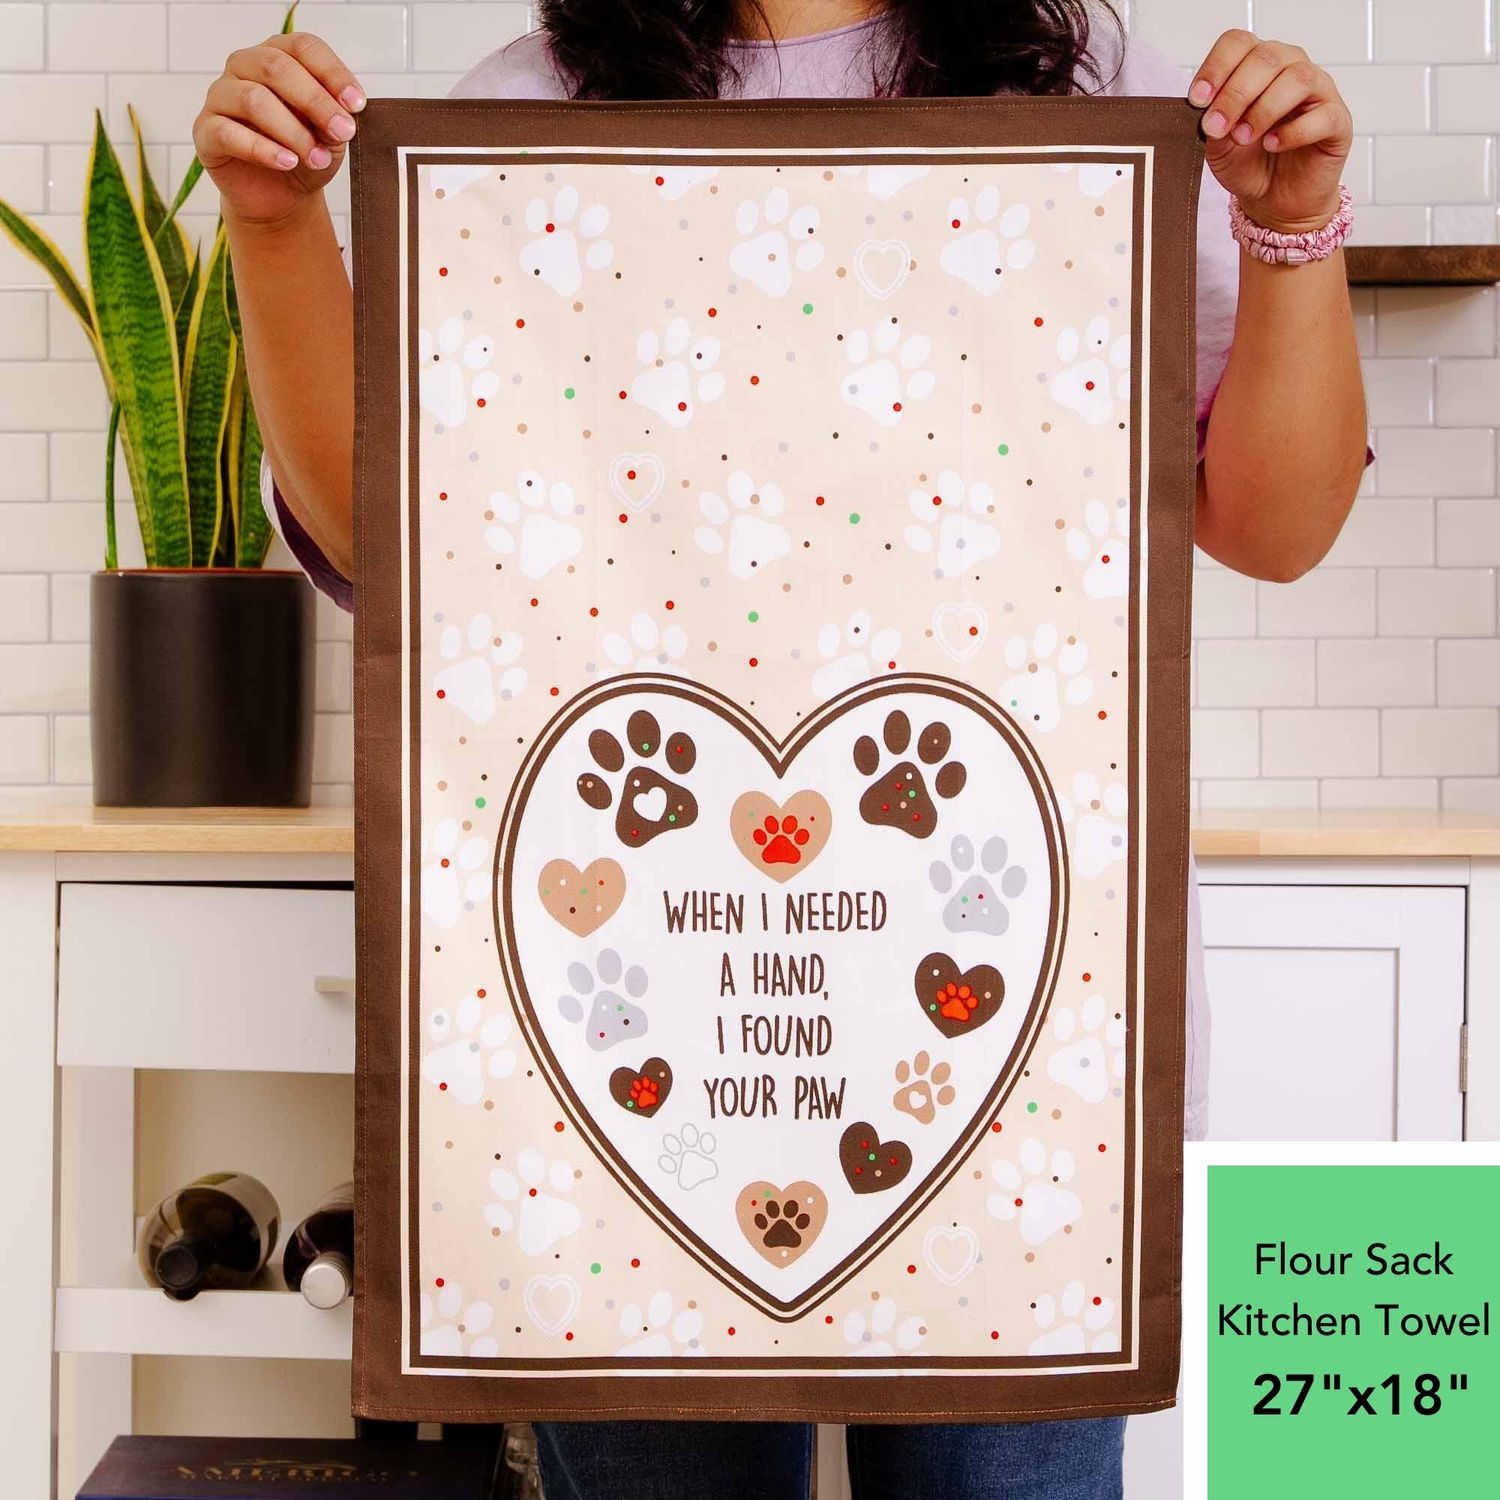 When I Needed A Hand, I Found Your Paw – 100% Cotton Flour Sack Cat Kitchen Dish Towel 27″ x 18″